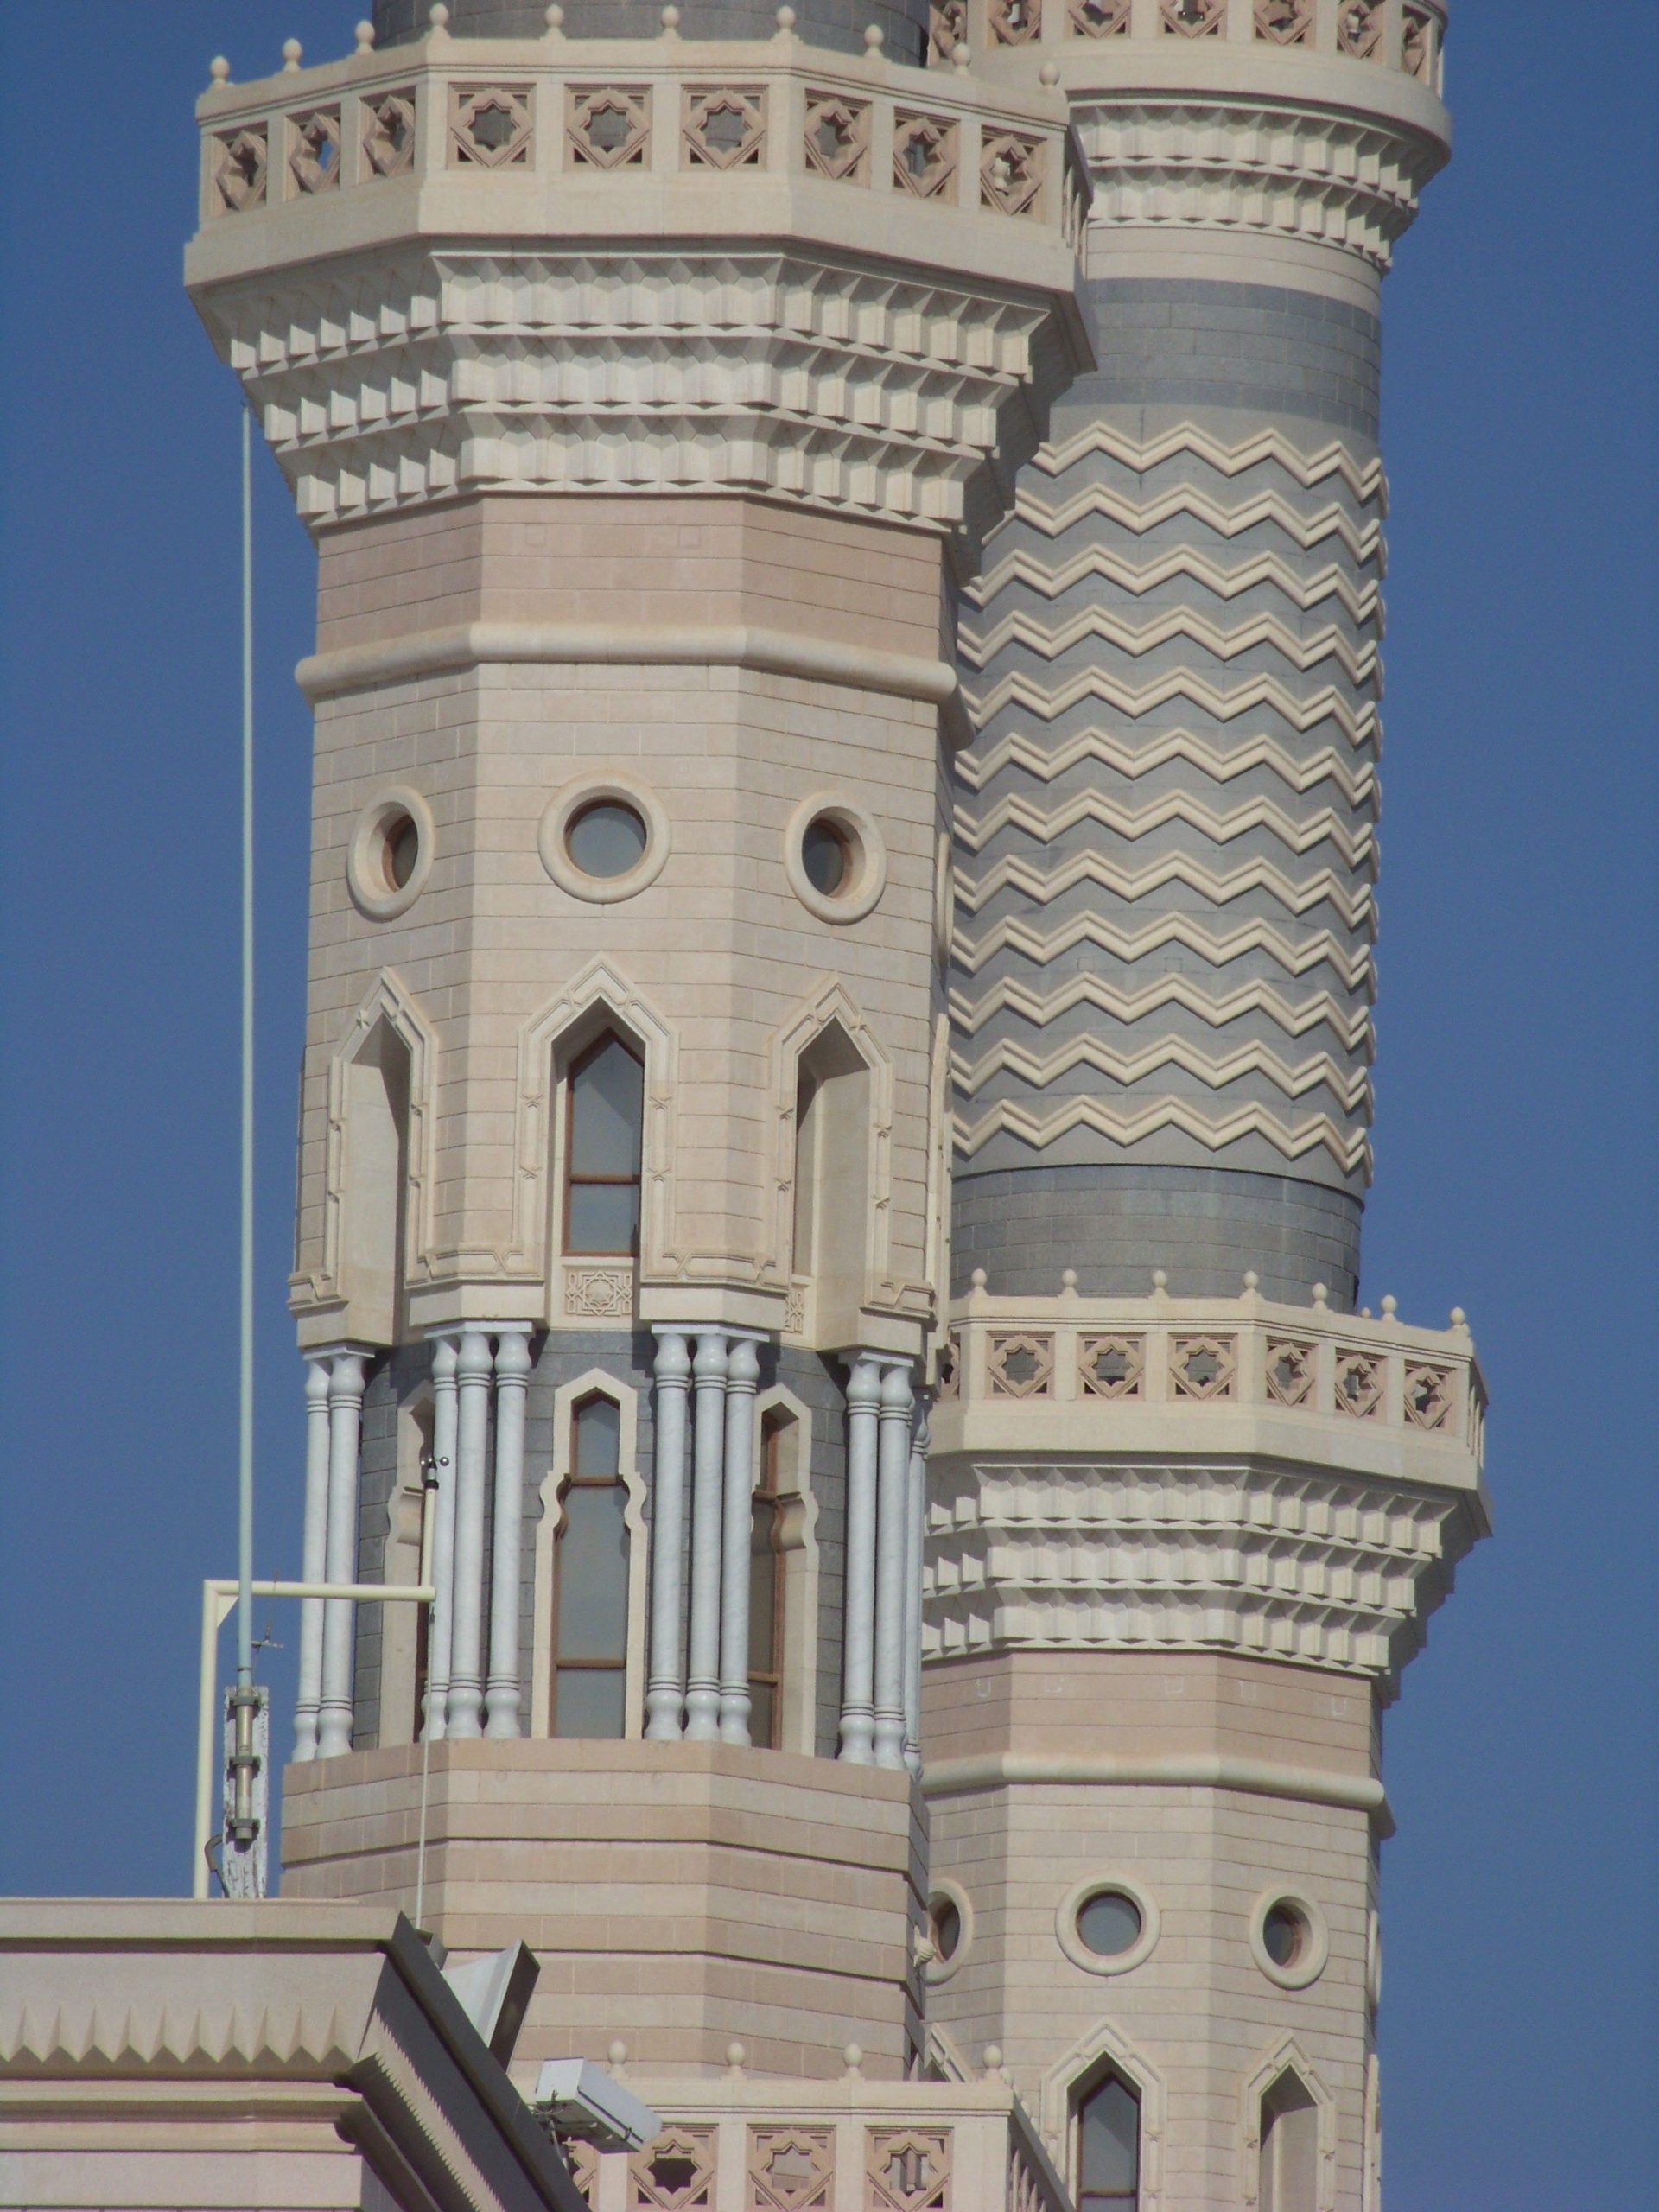 Nabawi Tower